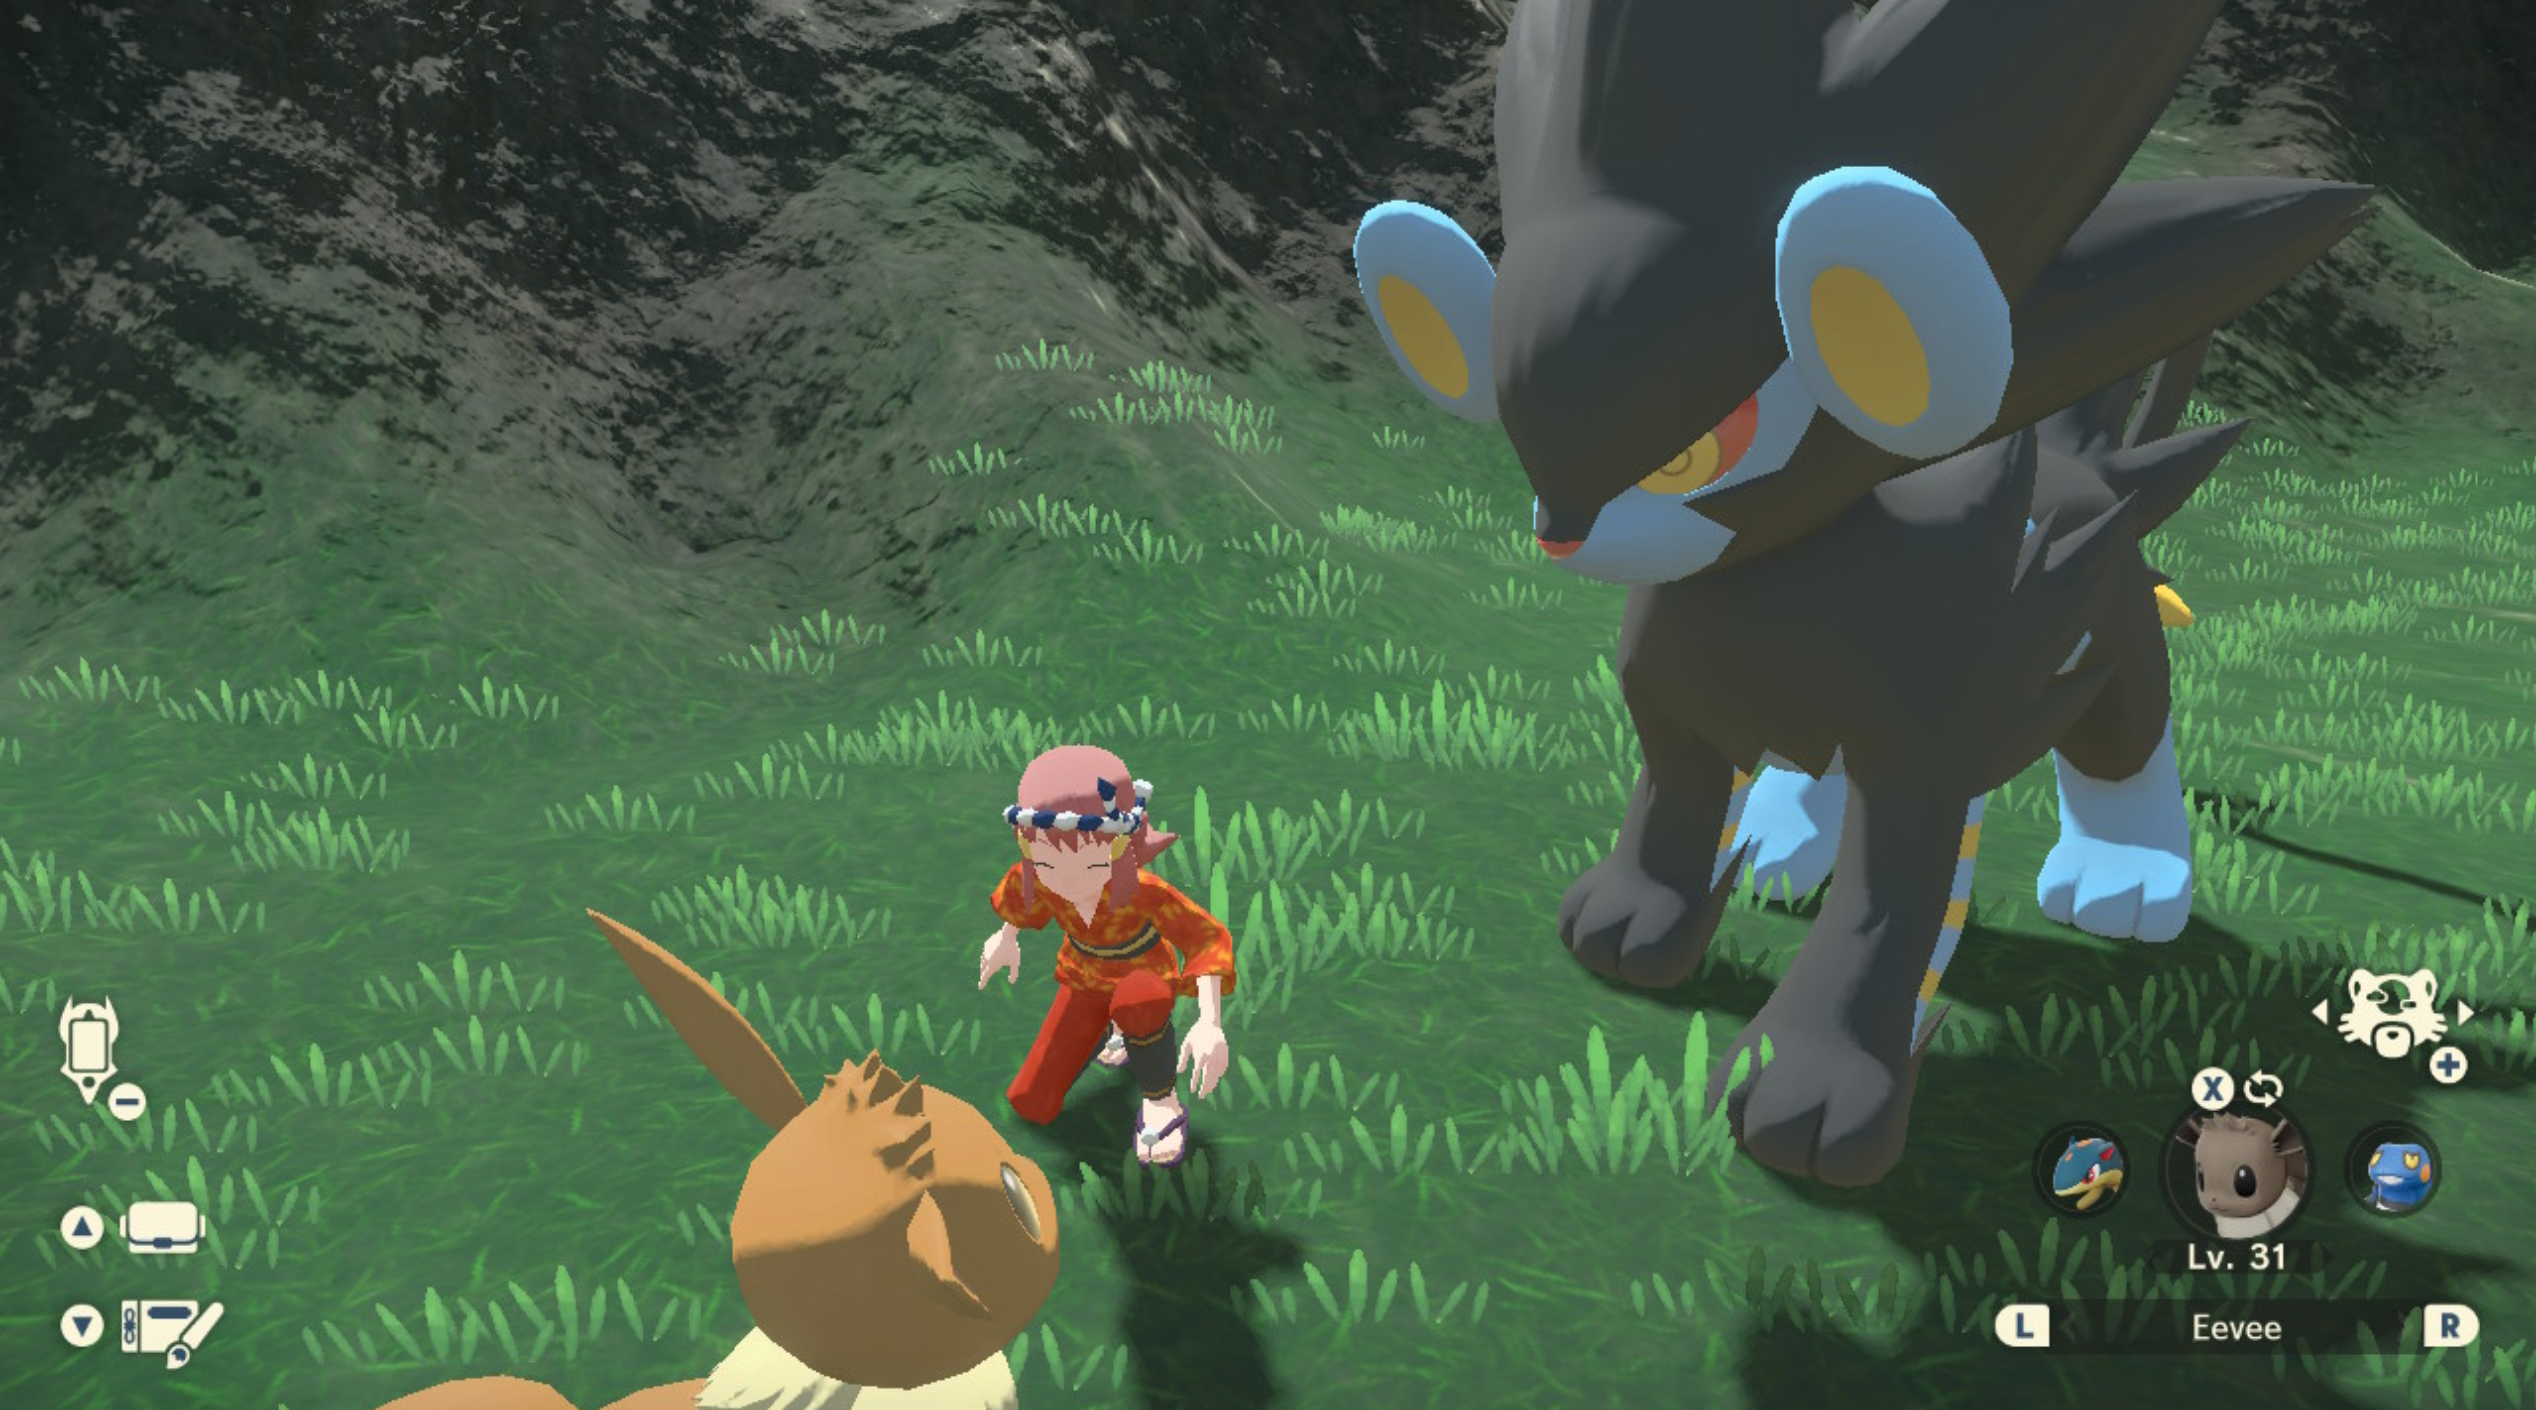 Screenshot from Pokémon Legends Arceus game, where a pink-haired player is crouched by a large eevee and an even larger Luxray in a grassy area